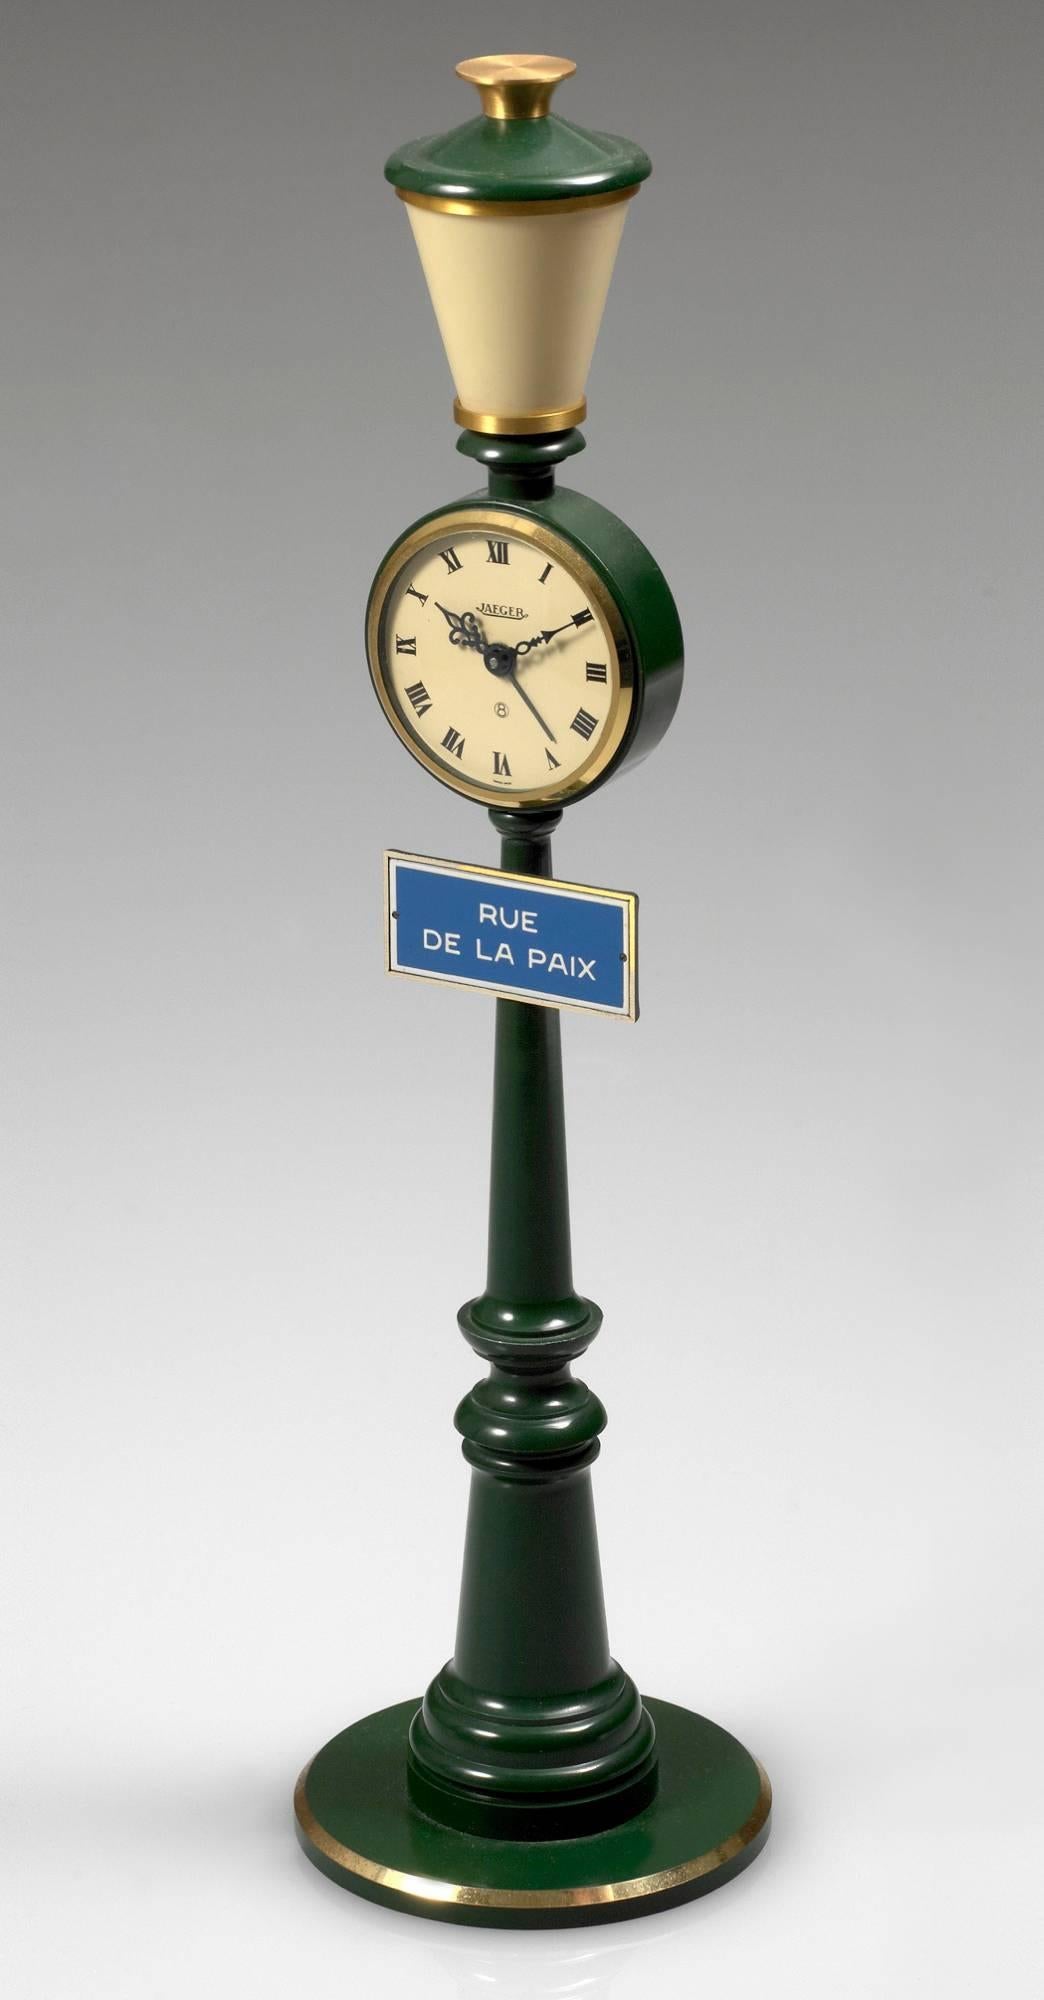 Jaeger, Rue de la Paix. Made circa 1975. Fine and unusual, 8-day going, keyless table clock, with alarm, designed as a street lamp.

Case : in the form of a gilt and green lacquered street lamp, applied street sign Rue de la Paix.

Dial : Beige with